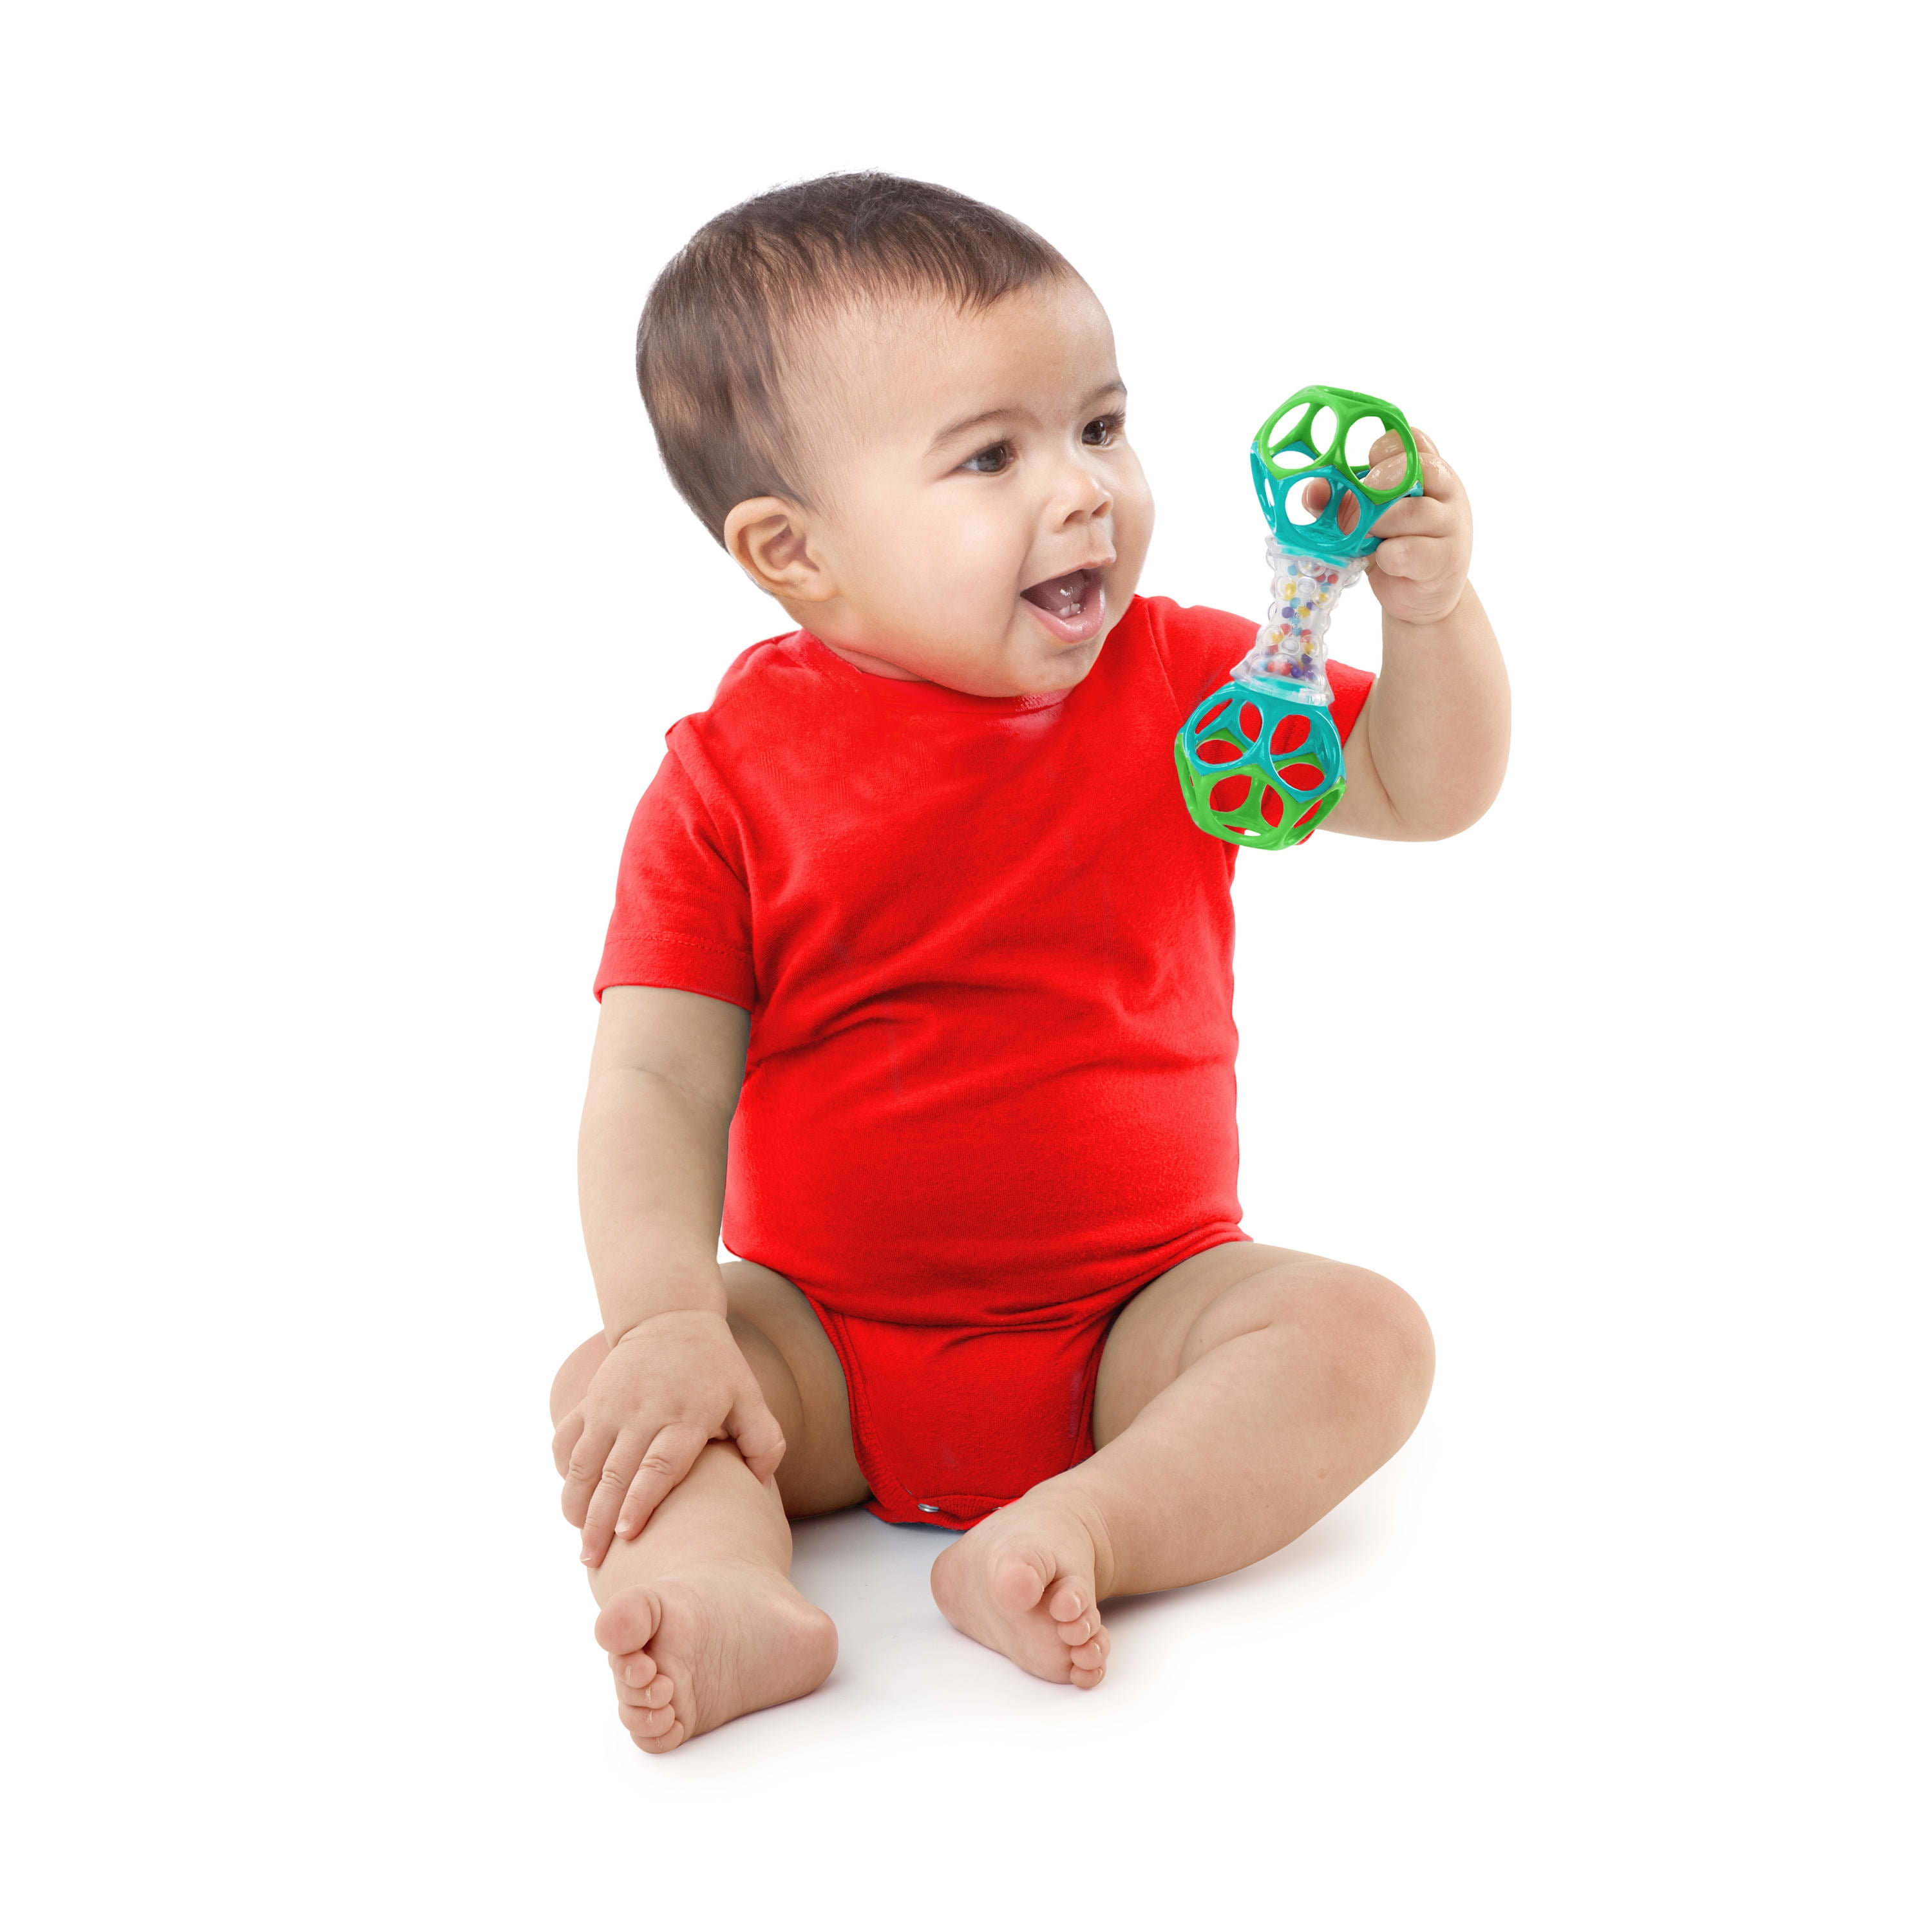 Months BPA Free by Kids II     U4 Oball Shaker-Rattle-Teether for 0 